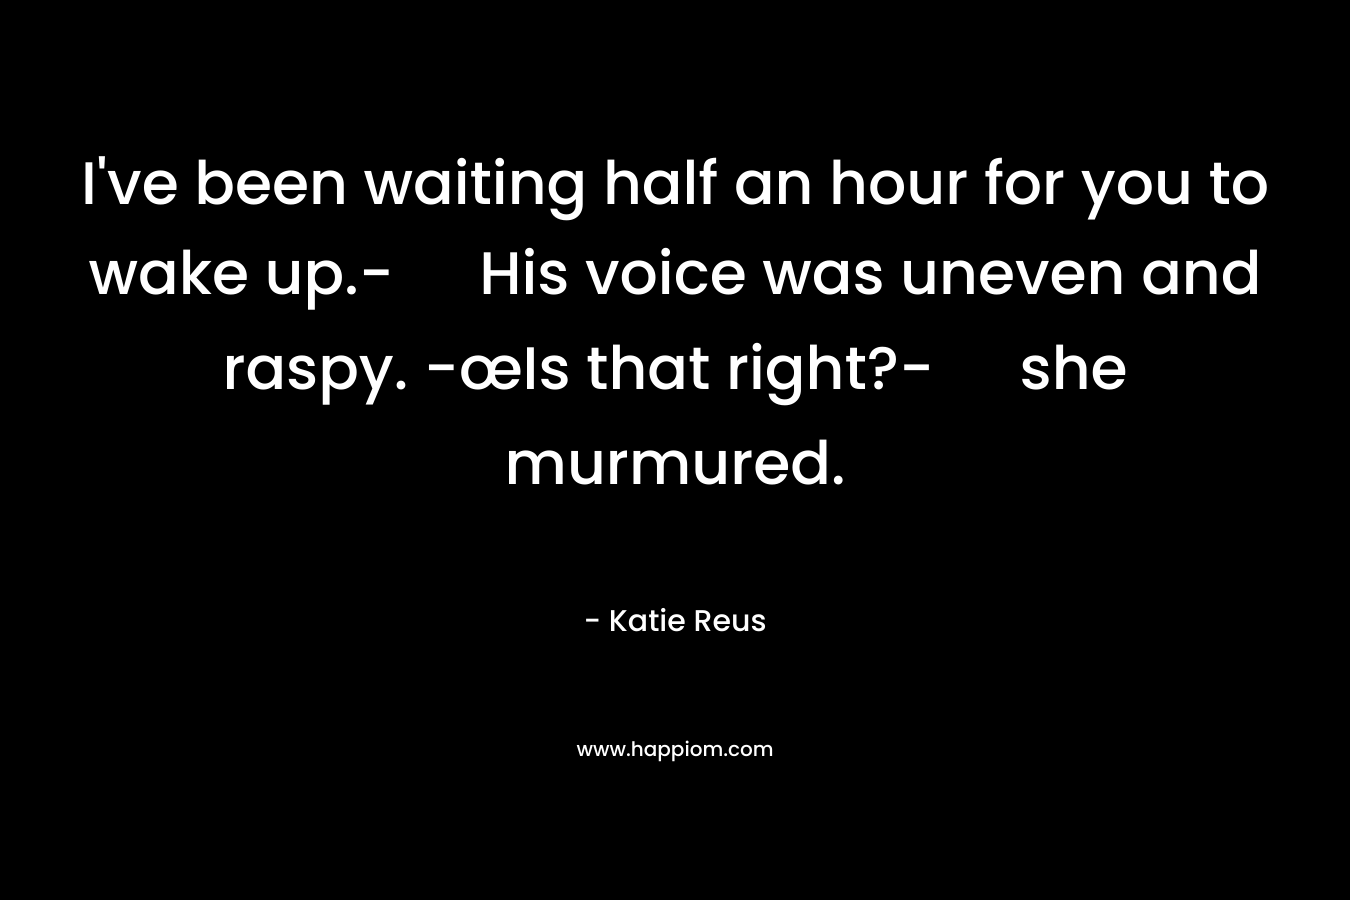 I've been waiting half an hour for you to wake up.- His voice was uneven and raspy. -œIs that right?- she murmured.